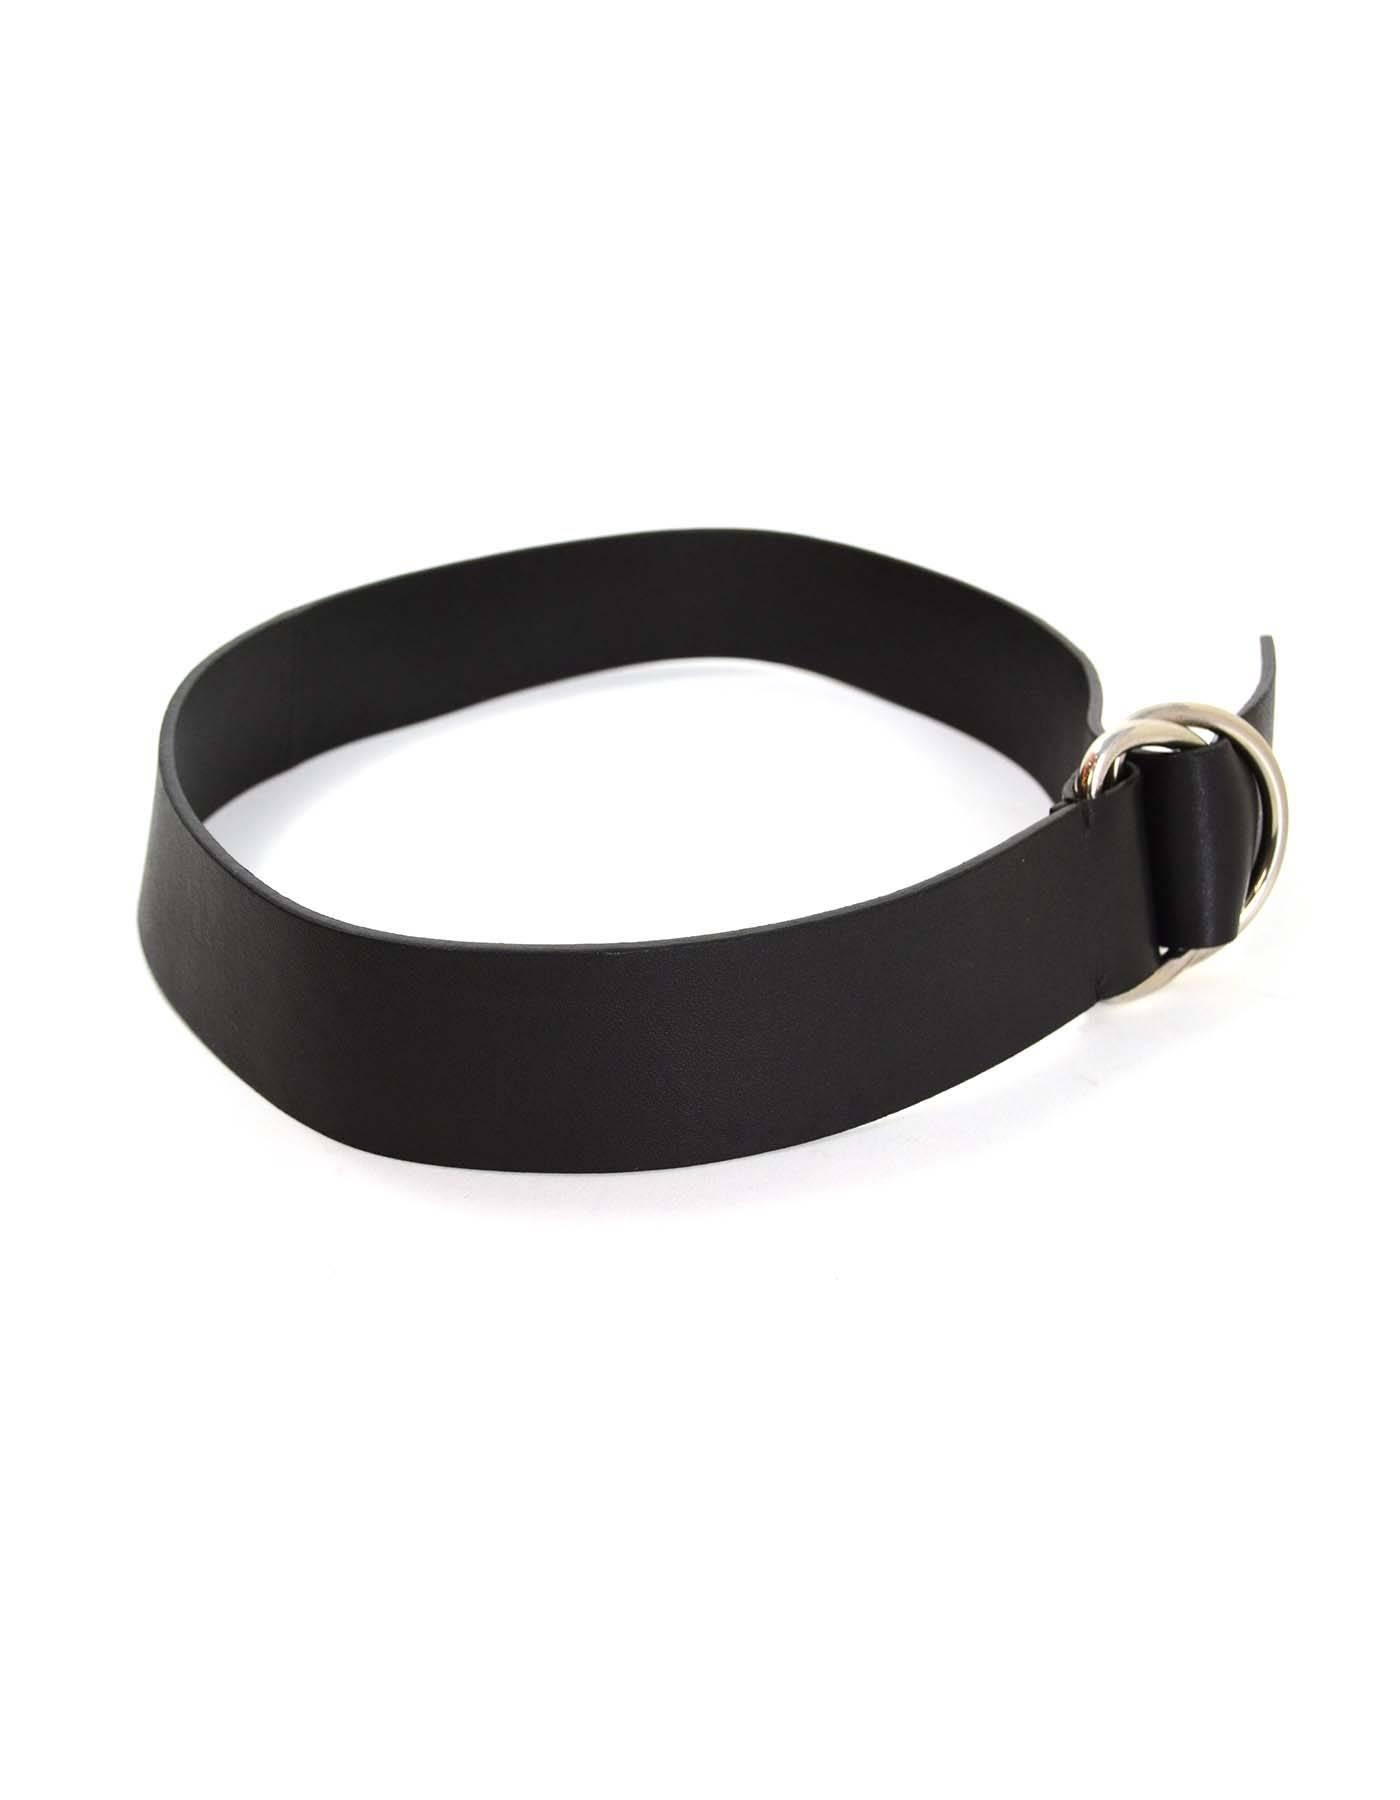 Prada Black Leather Belt sz 85 SHW In Excellent Condition In New York, NY